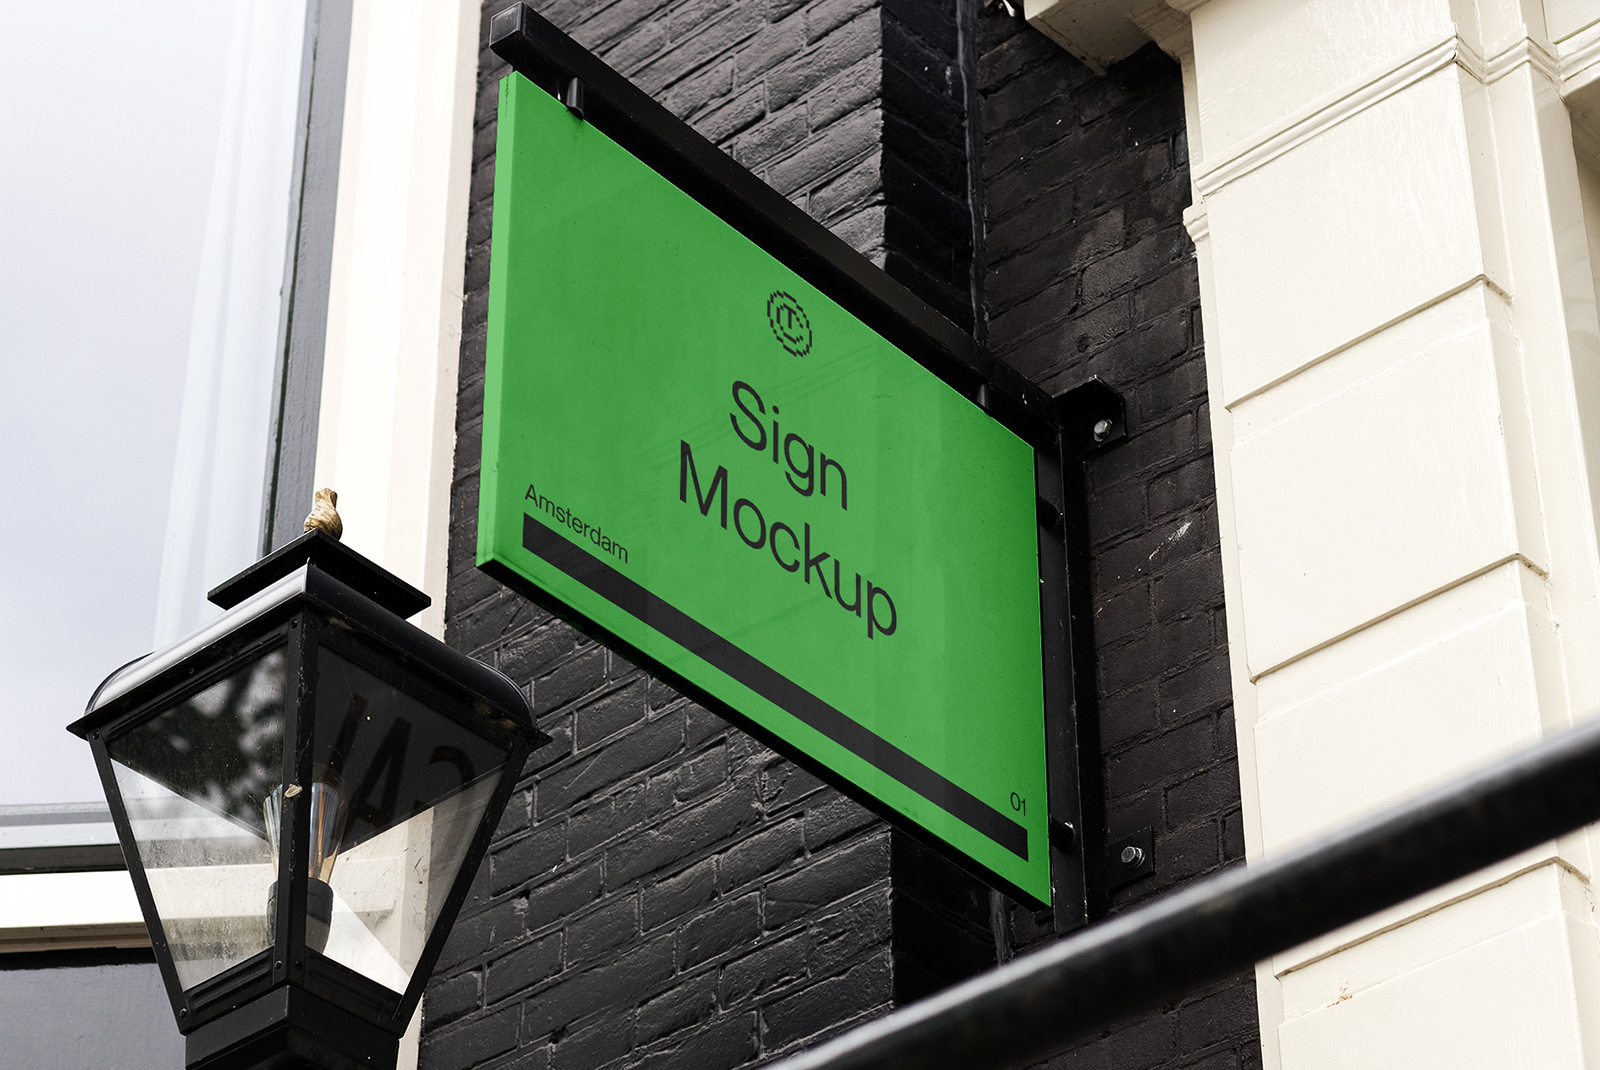 Outdoor sign mockup on building facade for branding, green board graphic design display, realistic urban setting.